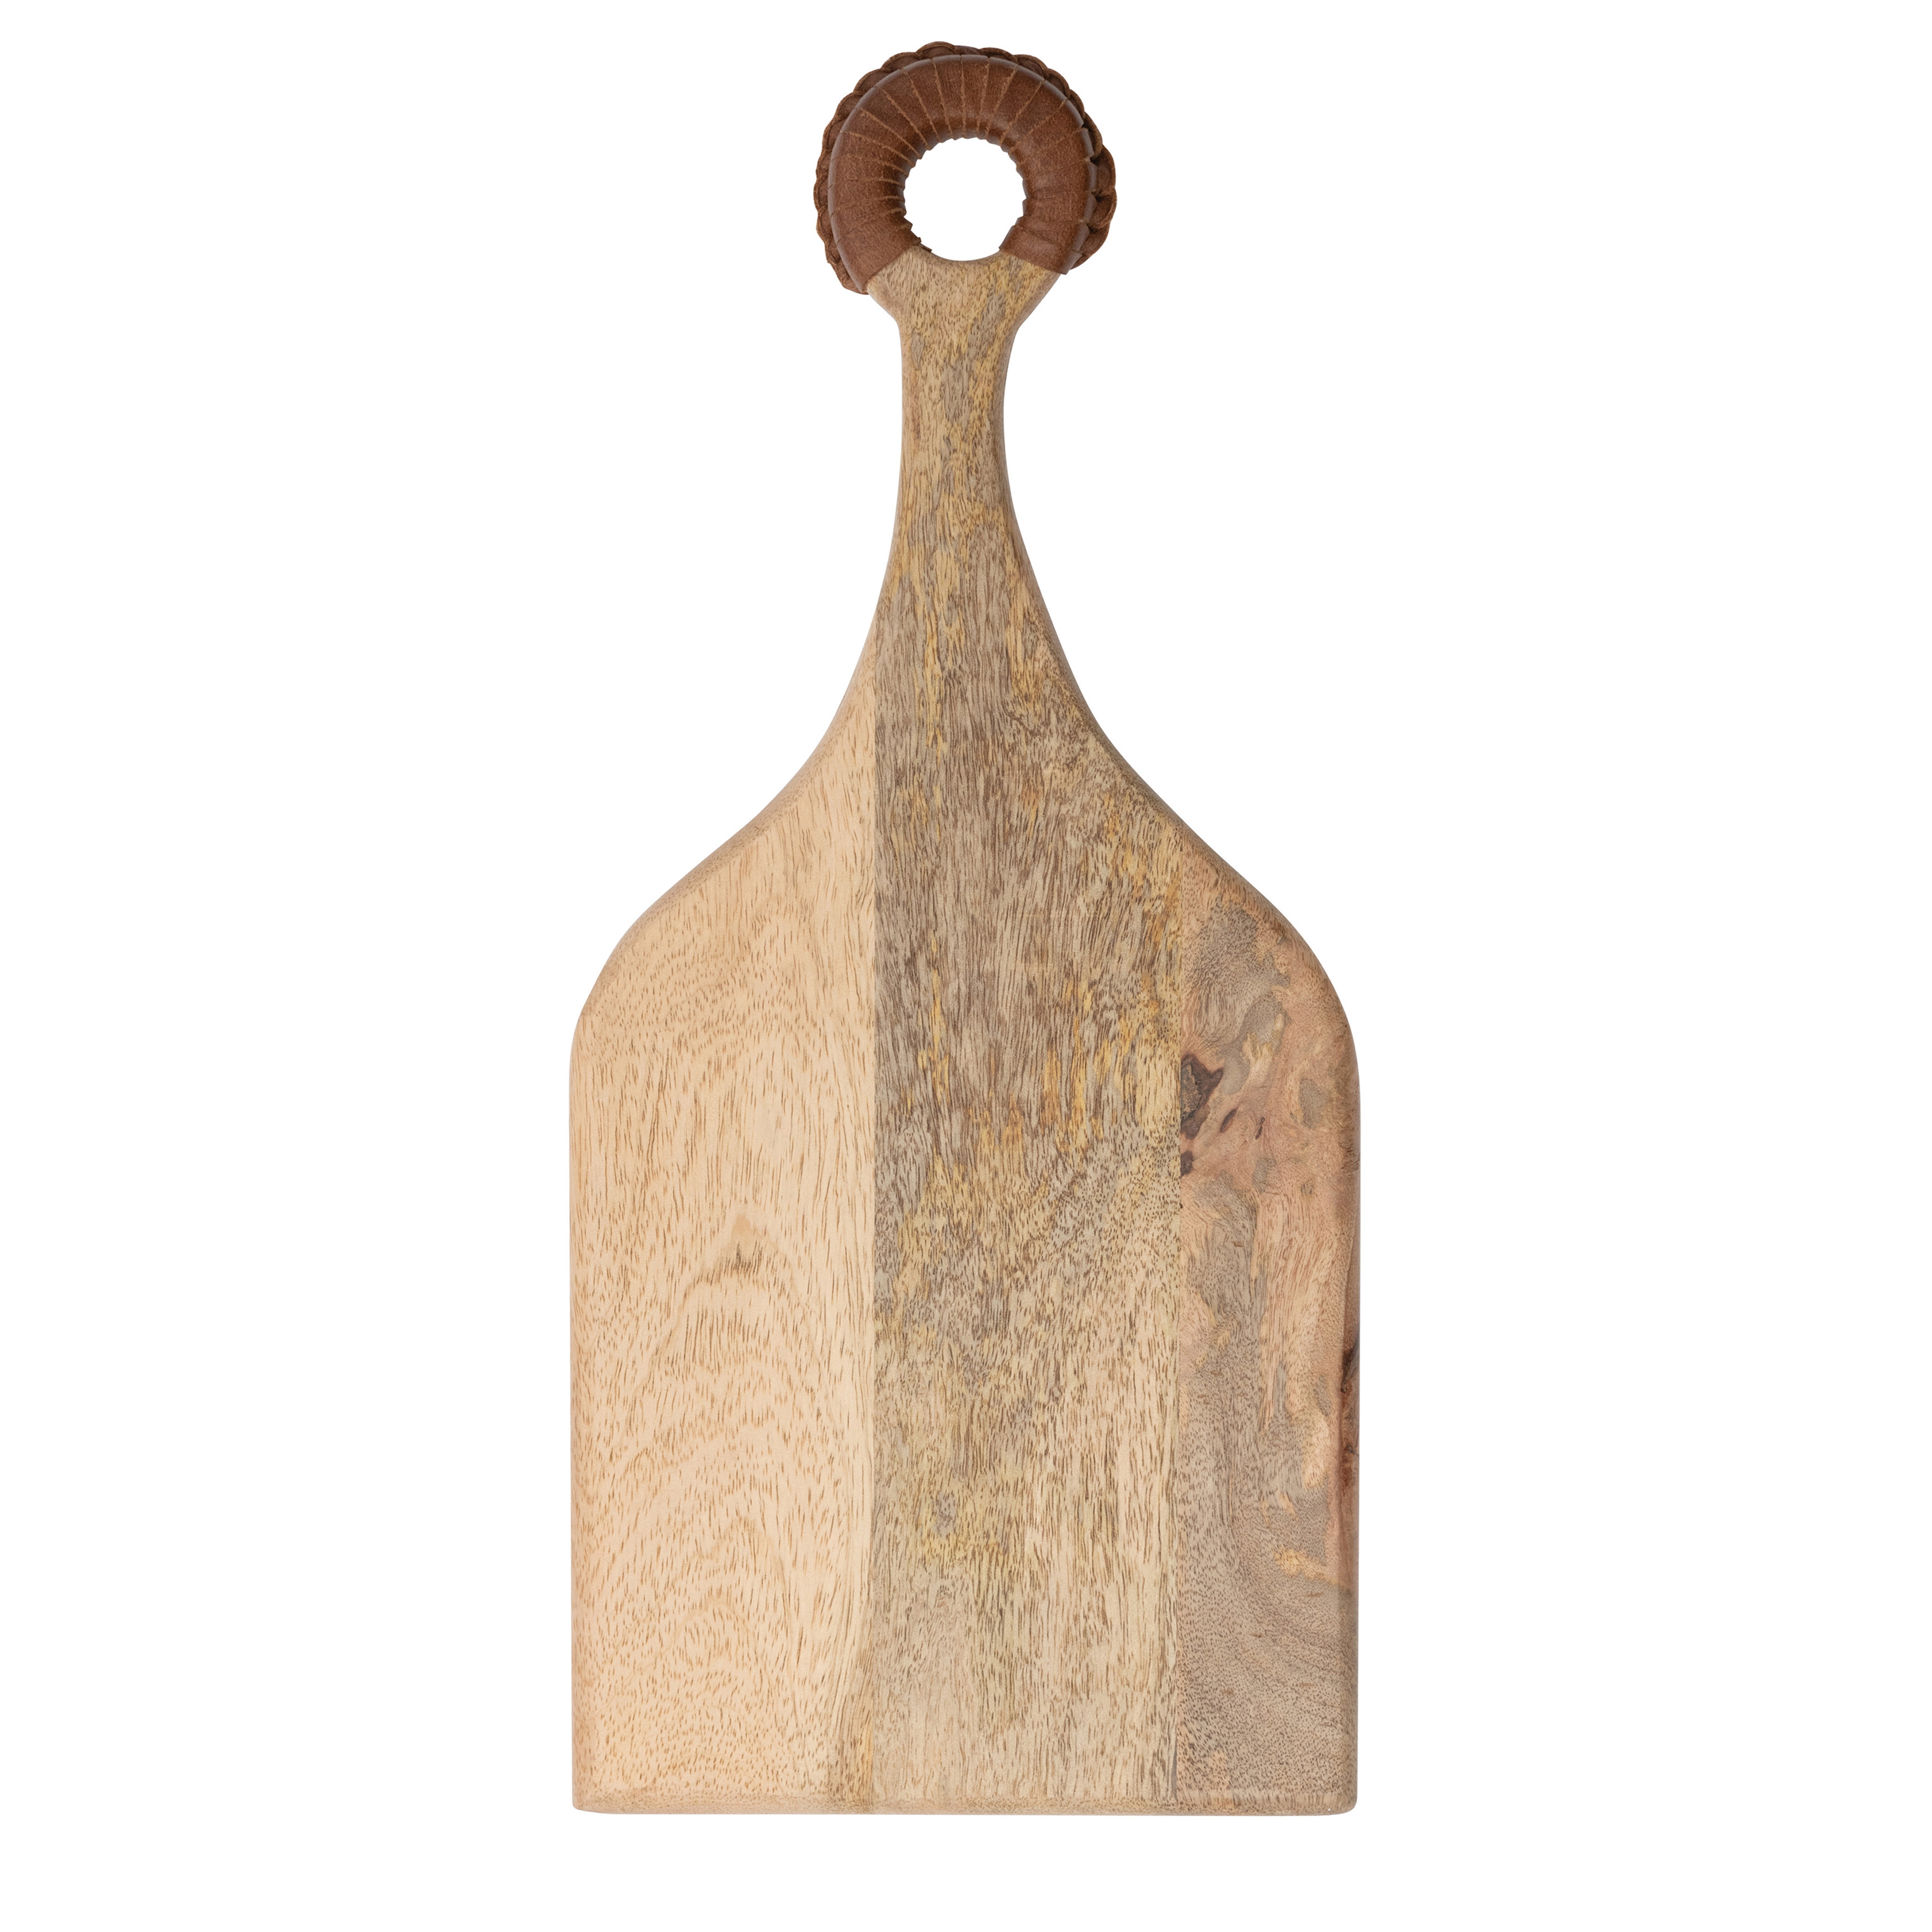  Mango Wood Cutting Board with Braided Leather Handle - Image 0